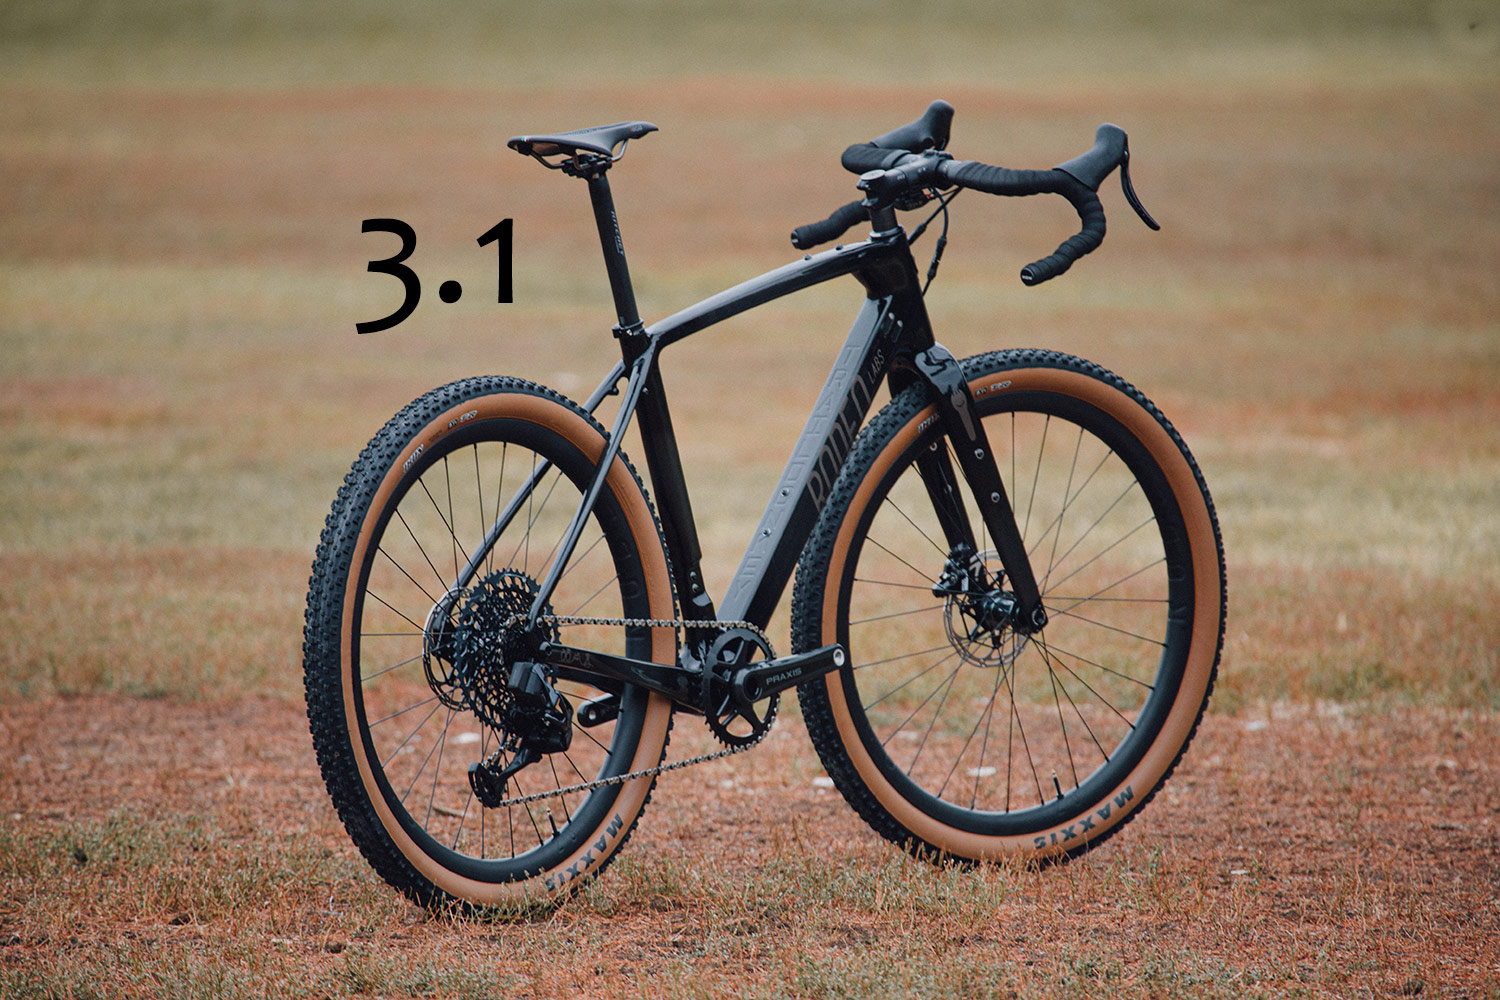 Black chain stay protection for gravel bike, road - High quality